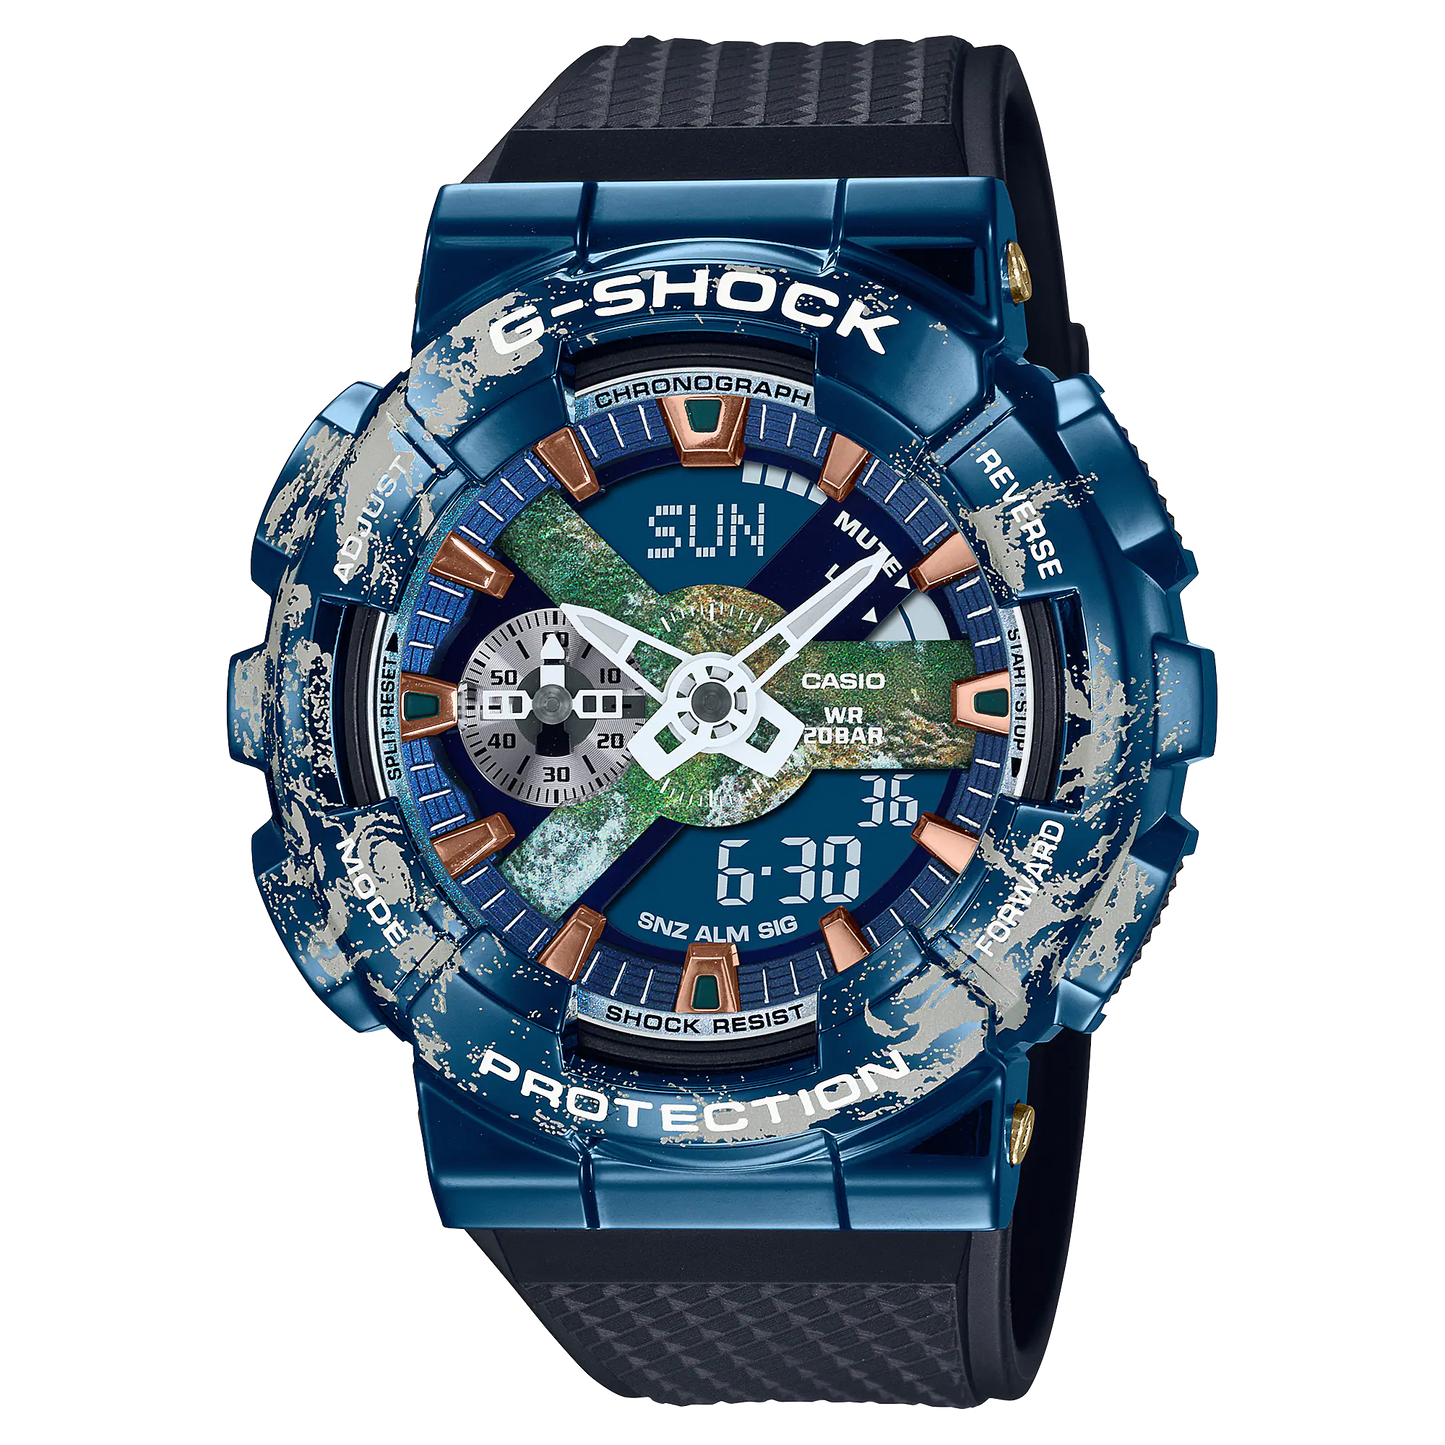 Casio G-Shock Metal Covered GM-110 Series Watch 'Planet Earth' xld